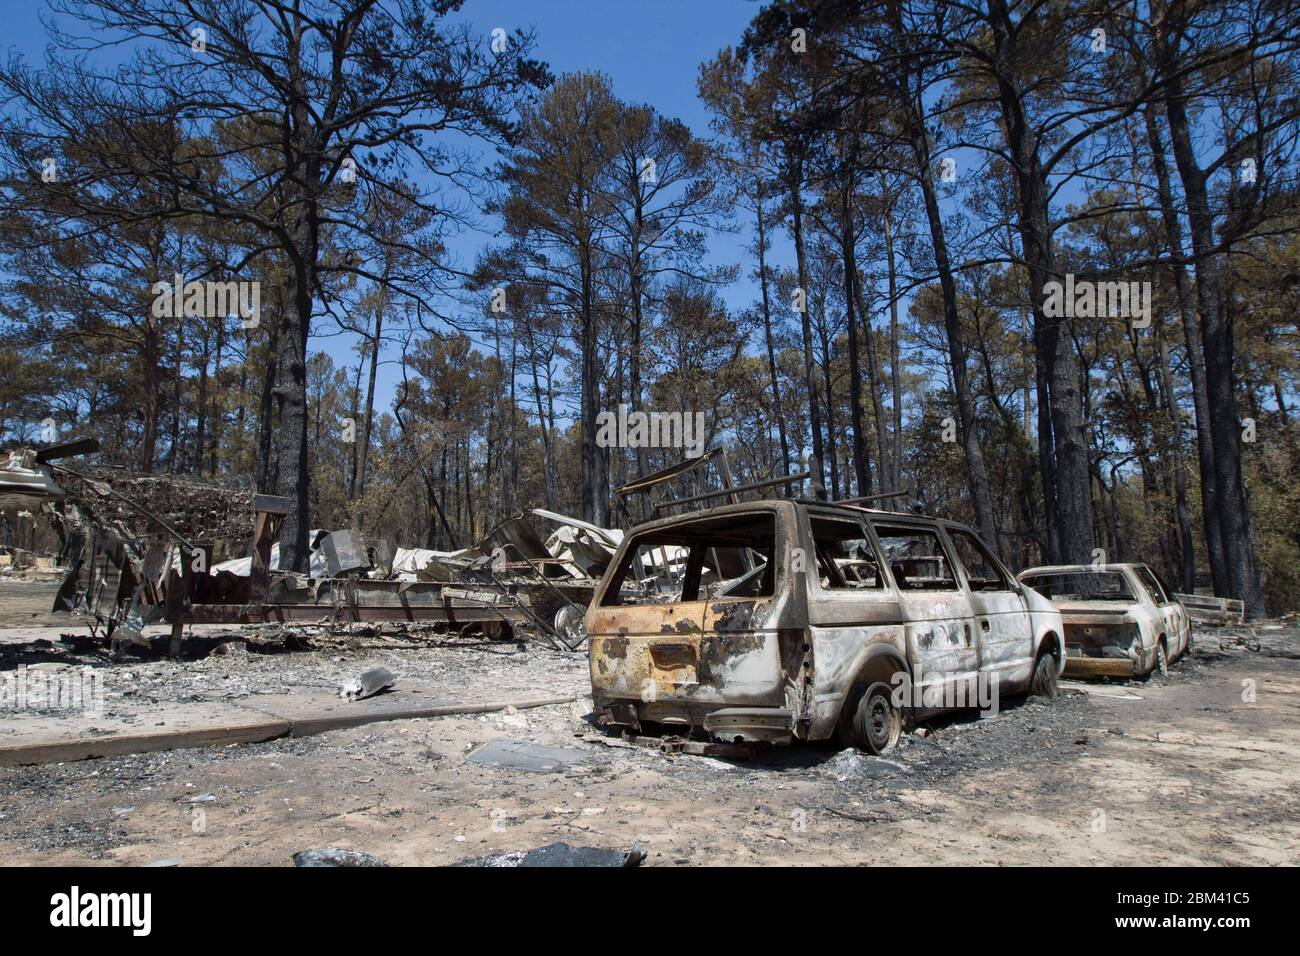 Bastrop County Texas USA, September 9, 2011: The aftermath of wildfire through the piney woods in Bastrop County 30 miles east of Austin is shown in these destroyed vehicles. The fires destroyed more than 1,400 houses and scorched more than 38,000 acres while it was out of control for five days. ©Bob Daemmrich Stock Photo